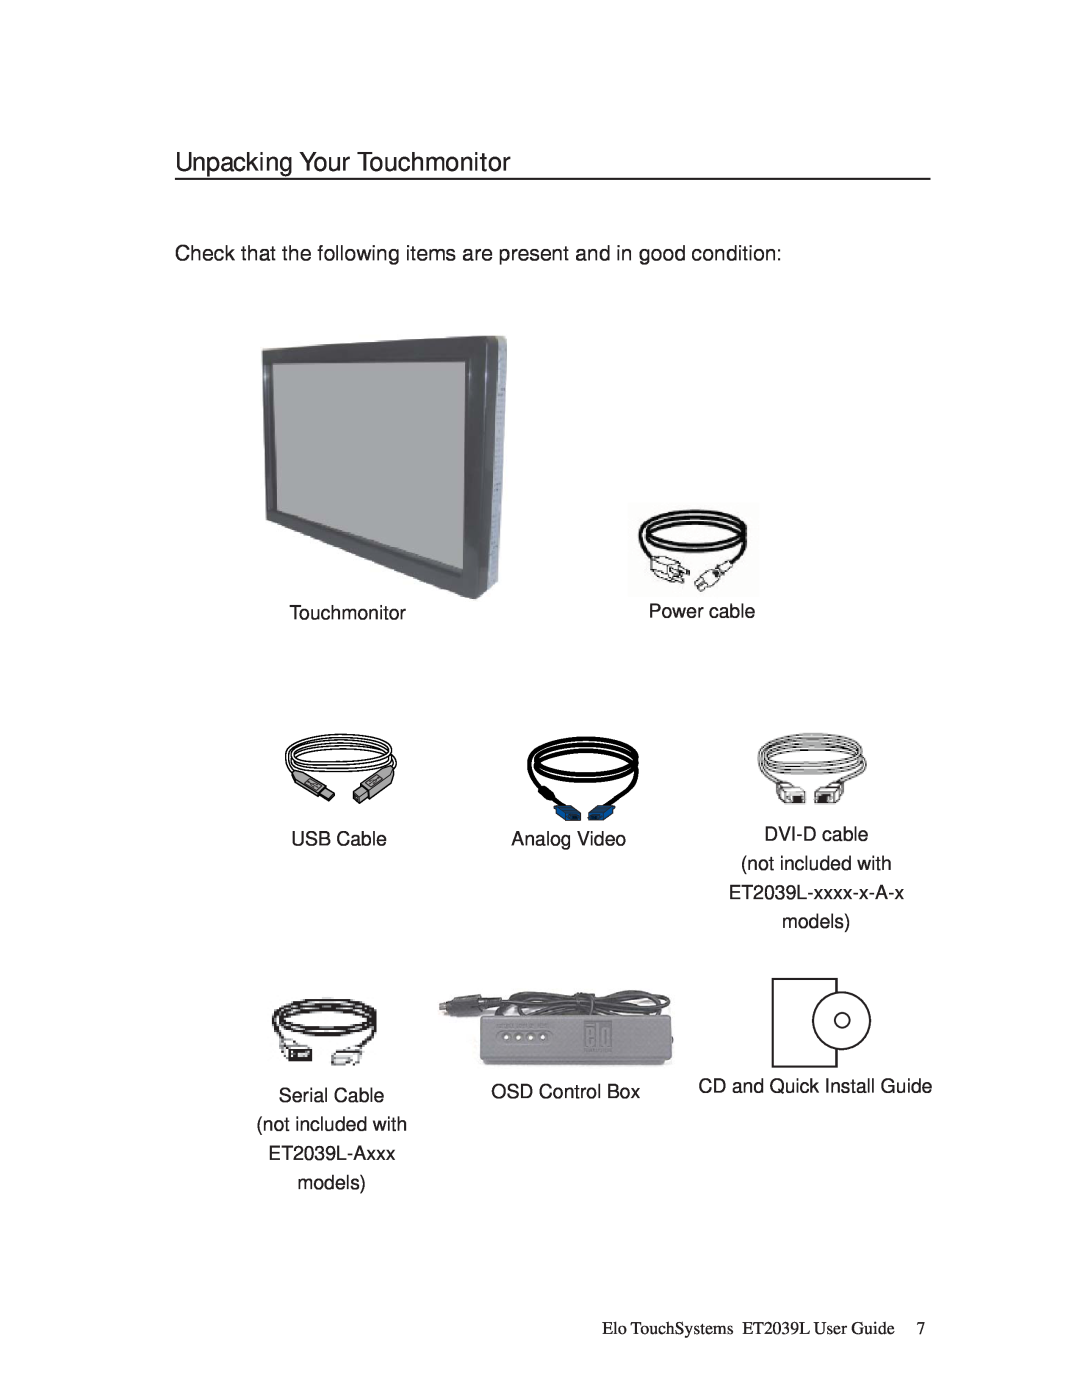 Elo TouchSystems ET2039L Unpacking Your Touchmonitor, Check that the following items are present and in good condition 